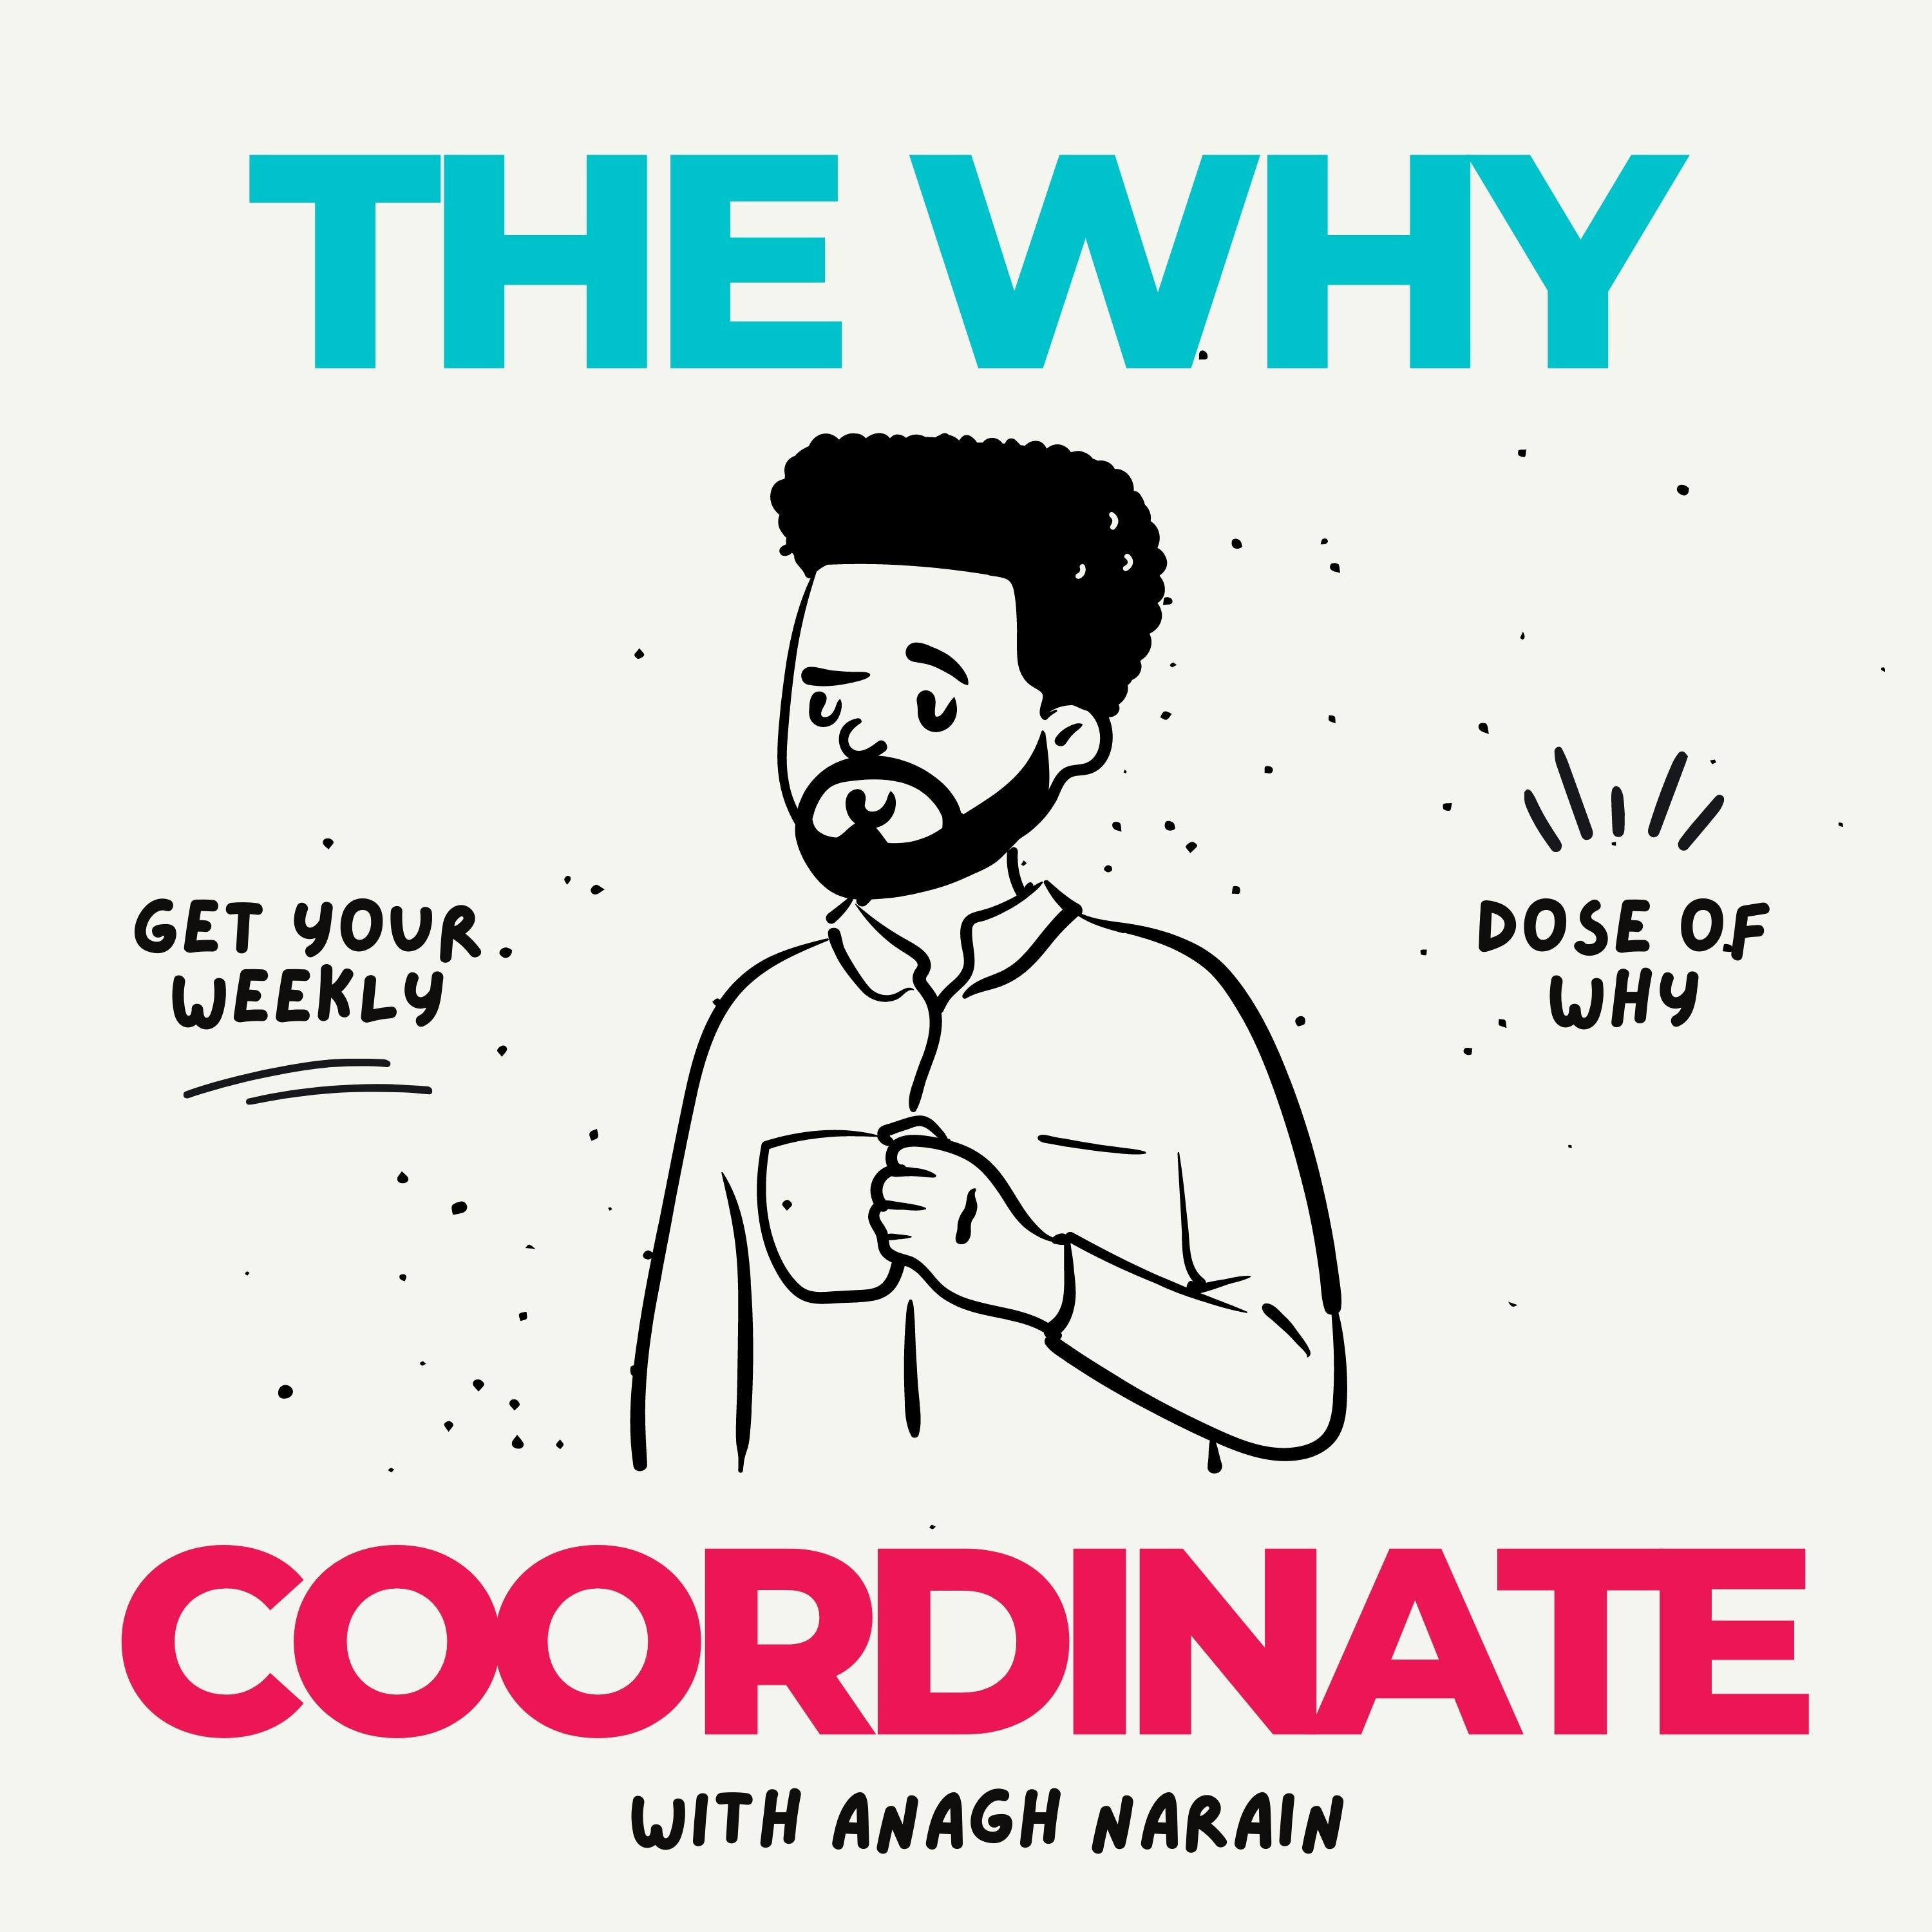 The Why Coordinate